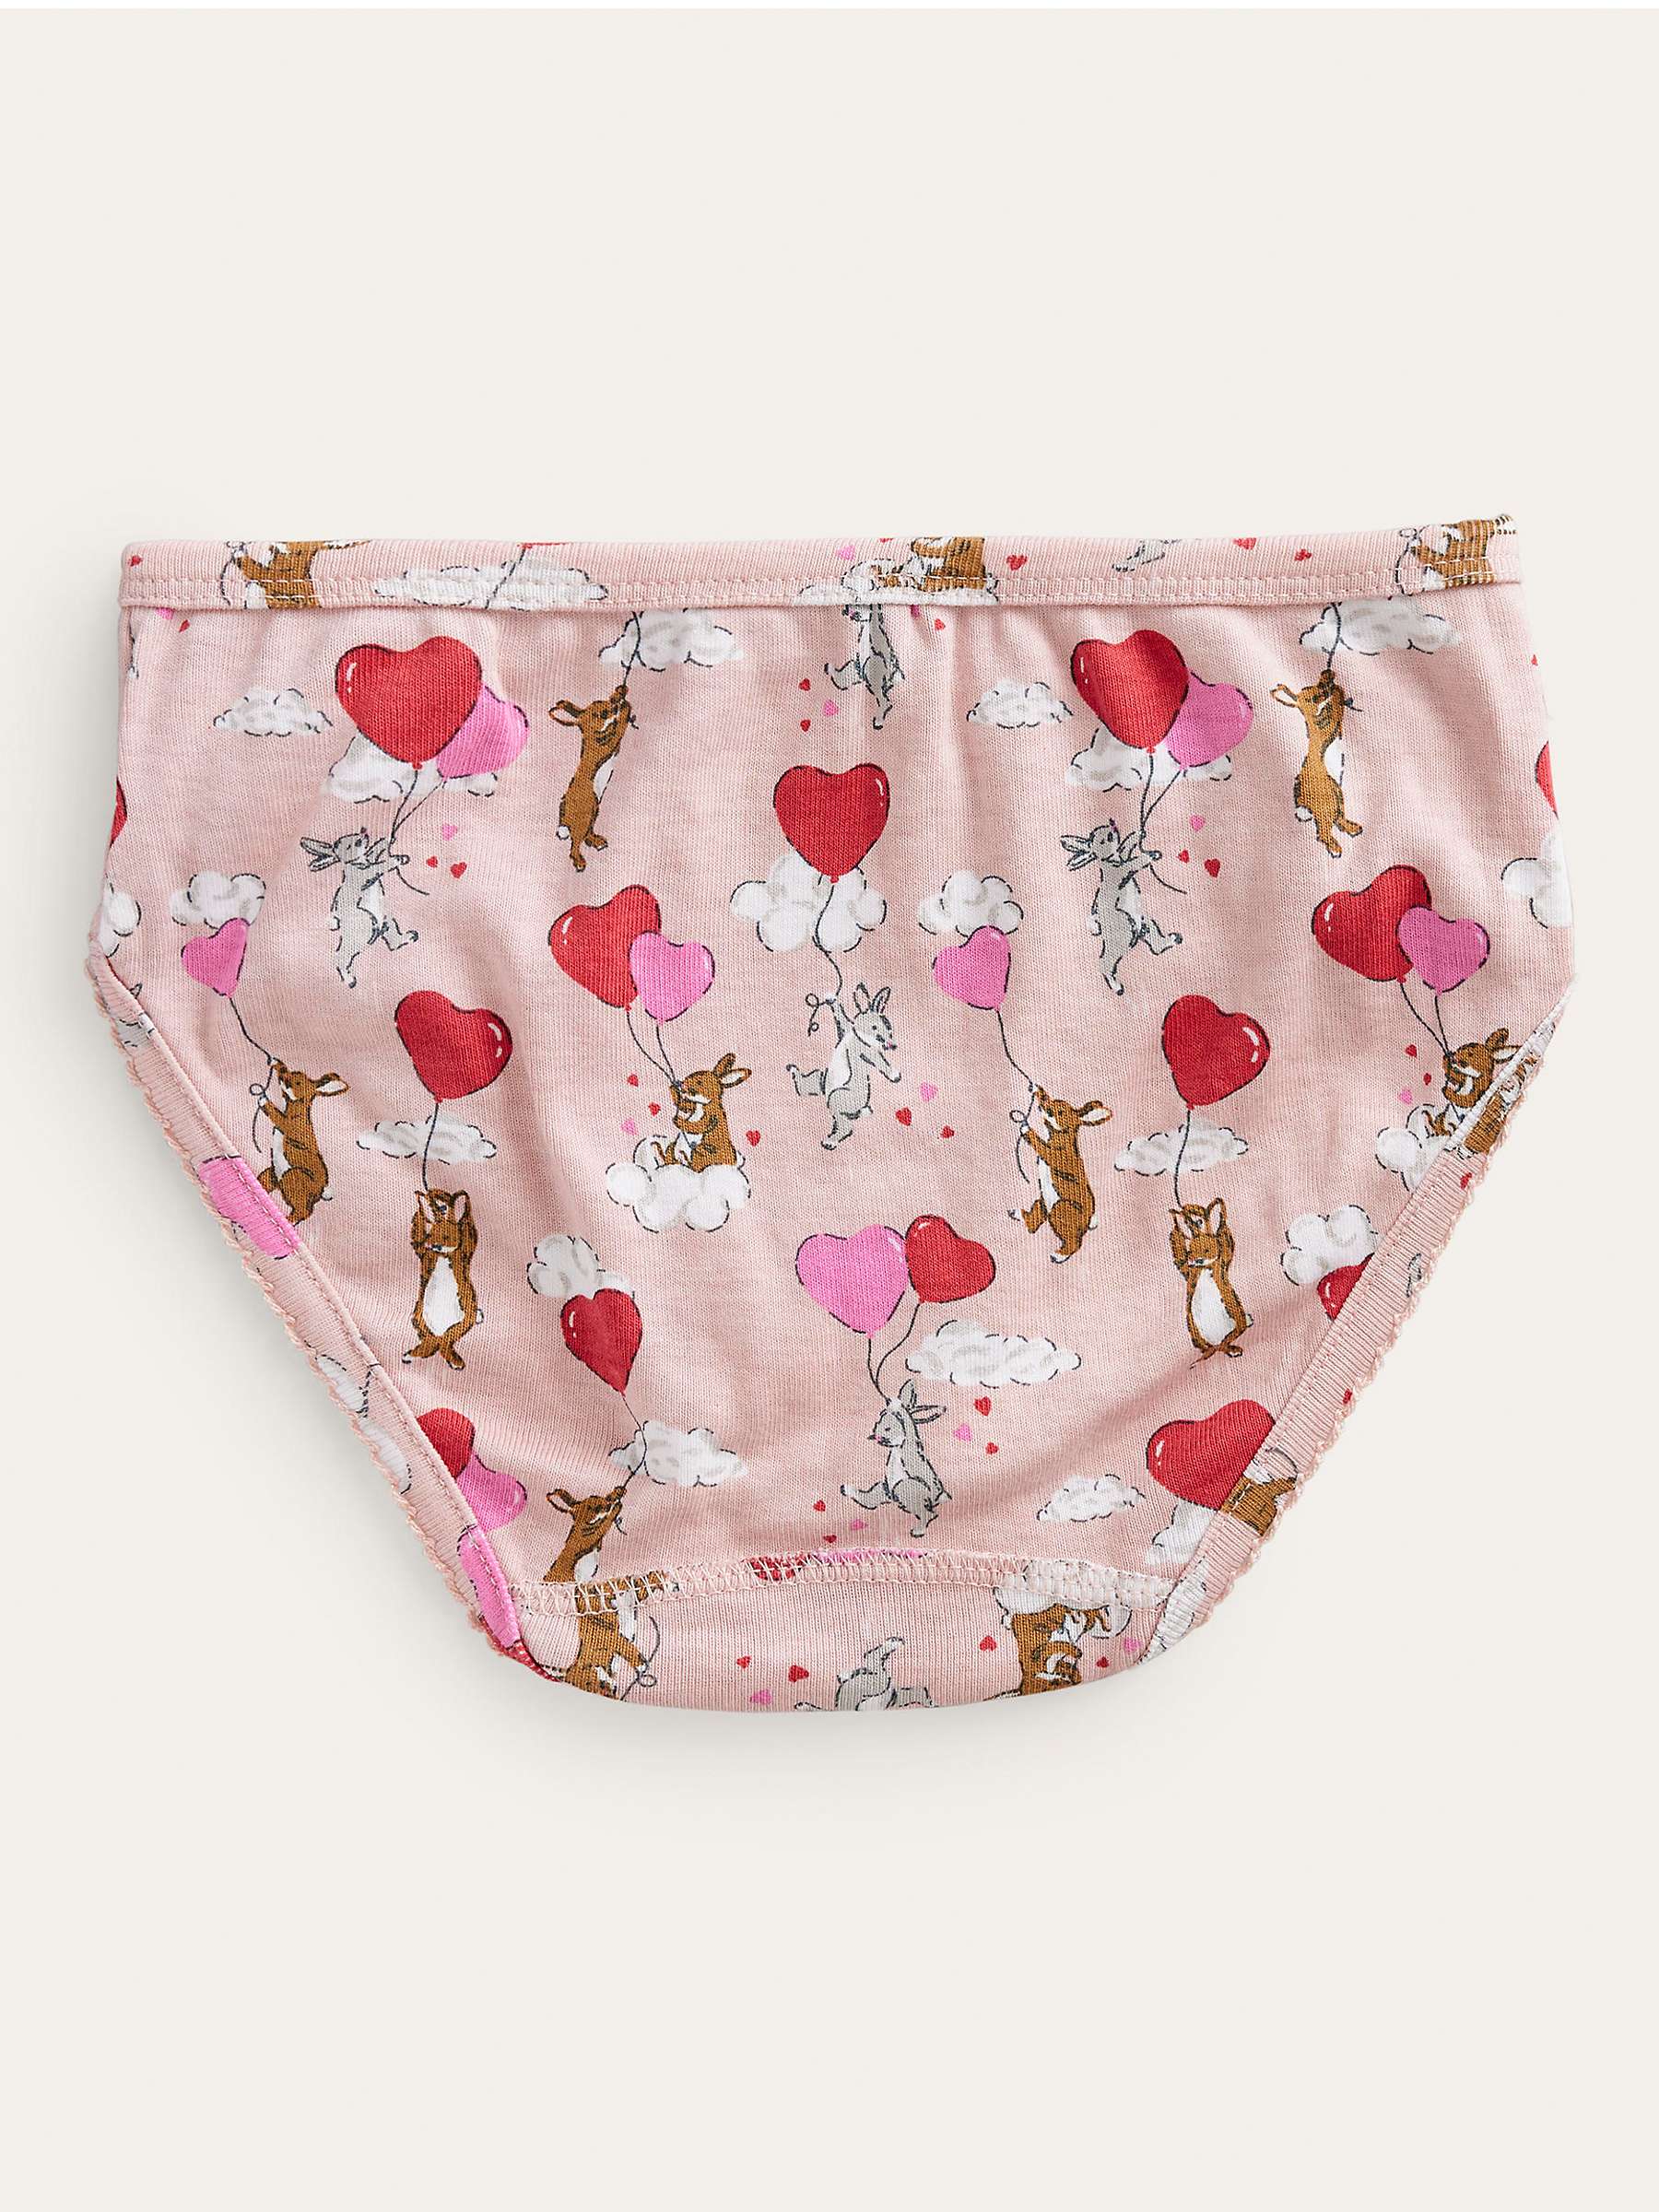 Buy Mini Boden Kids' Heart Knickers, Pack of 7, Multi Online at johnlewis.com